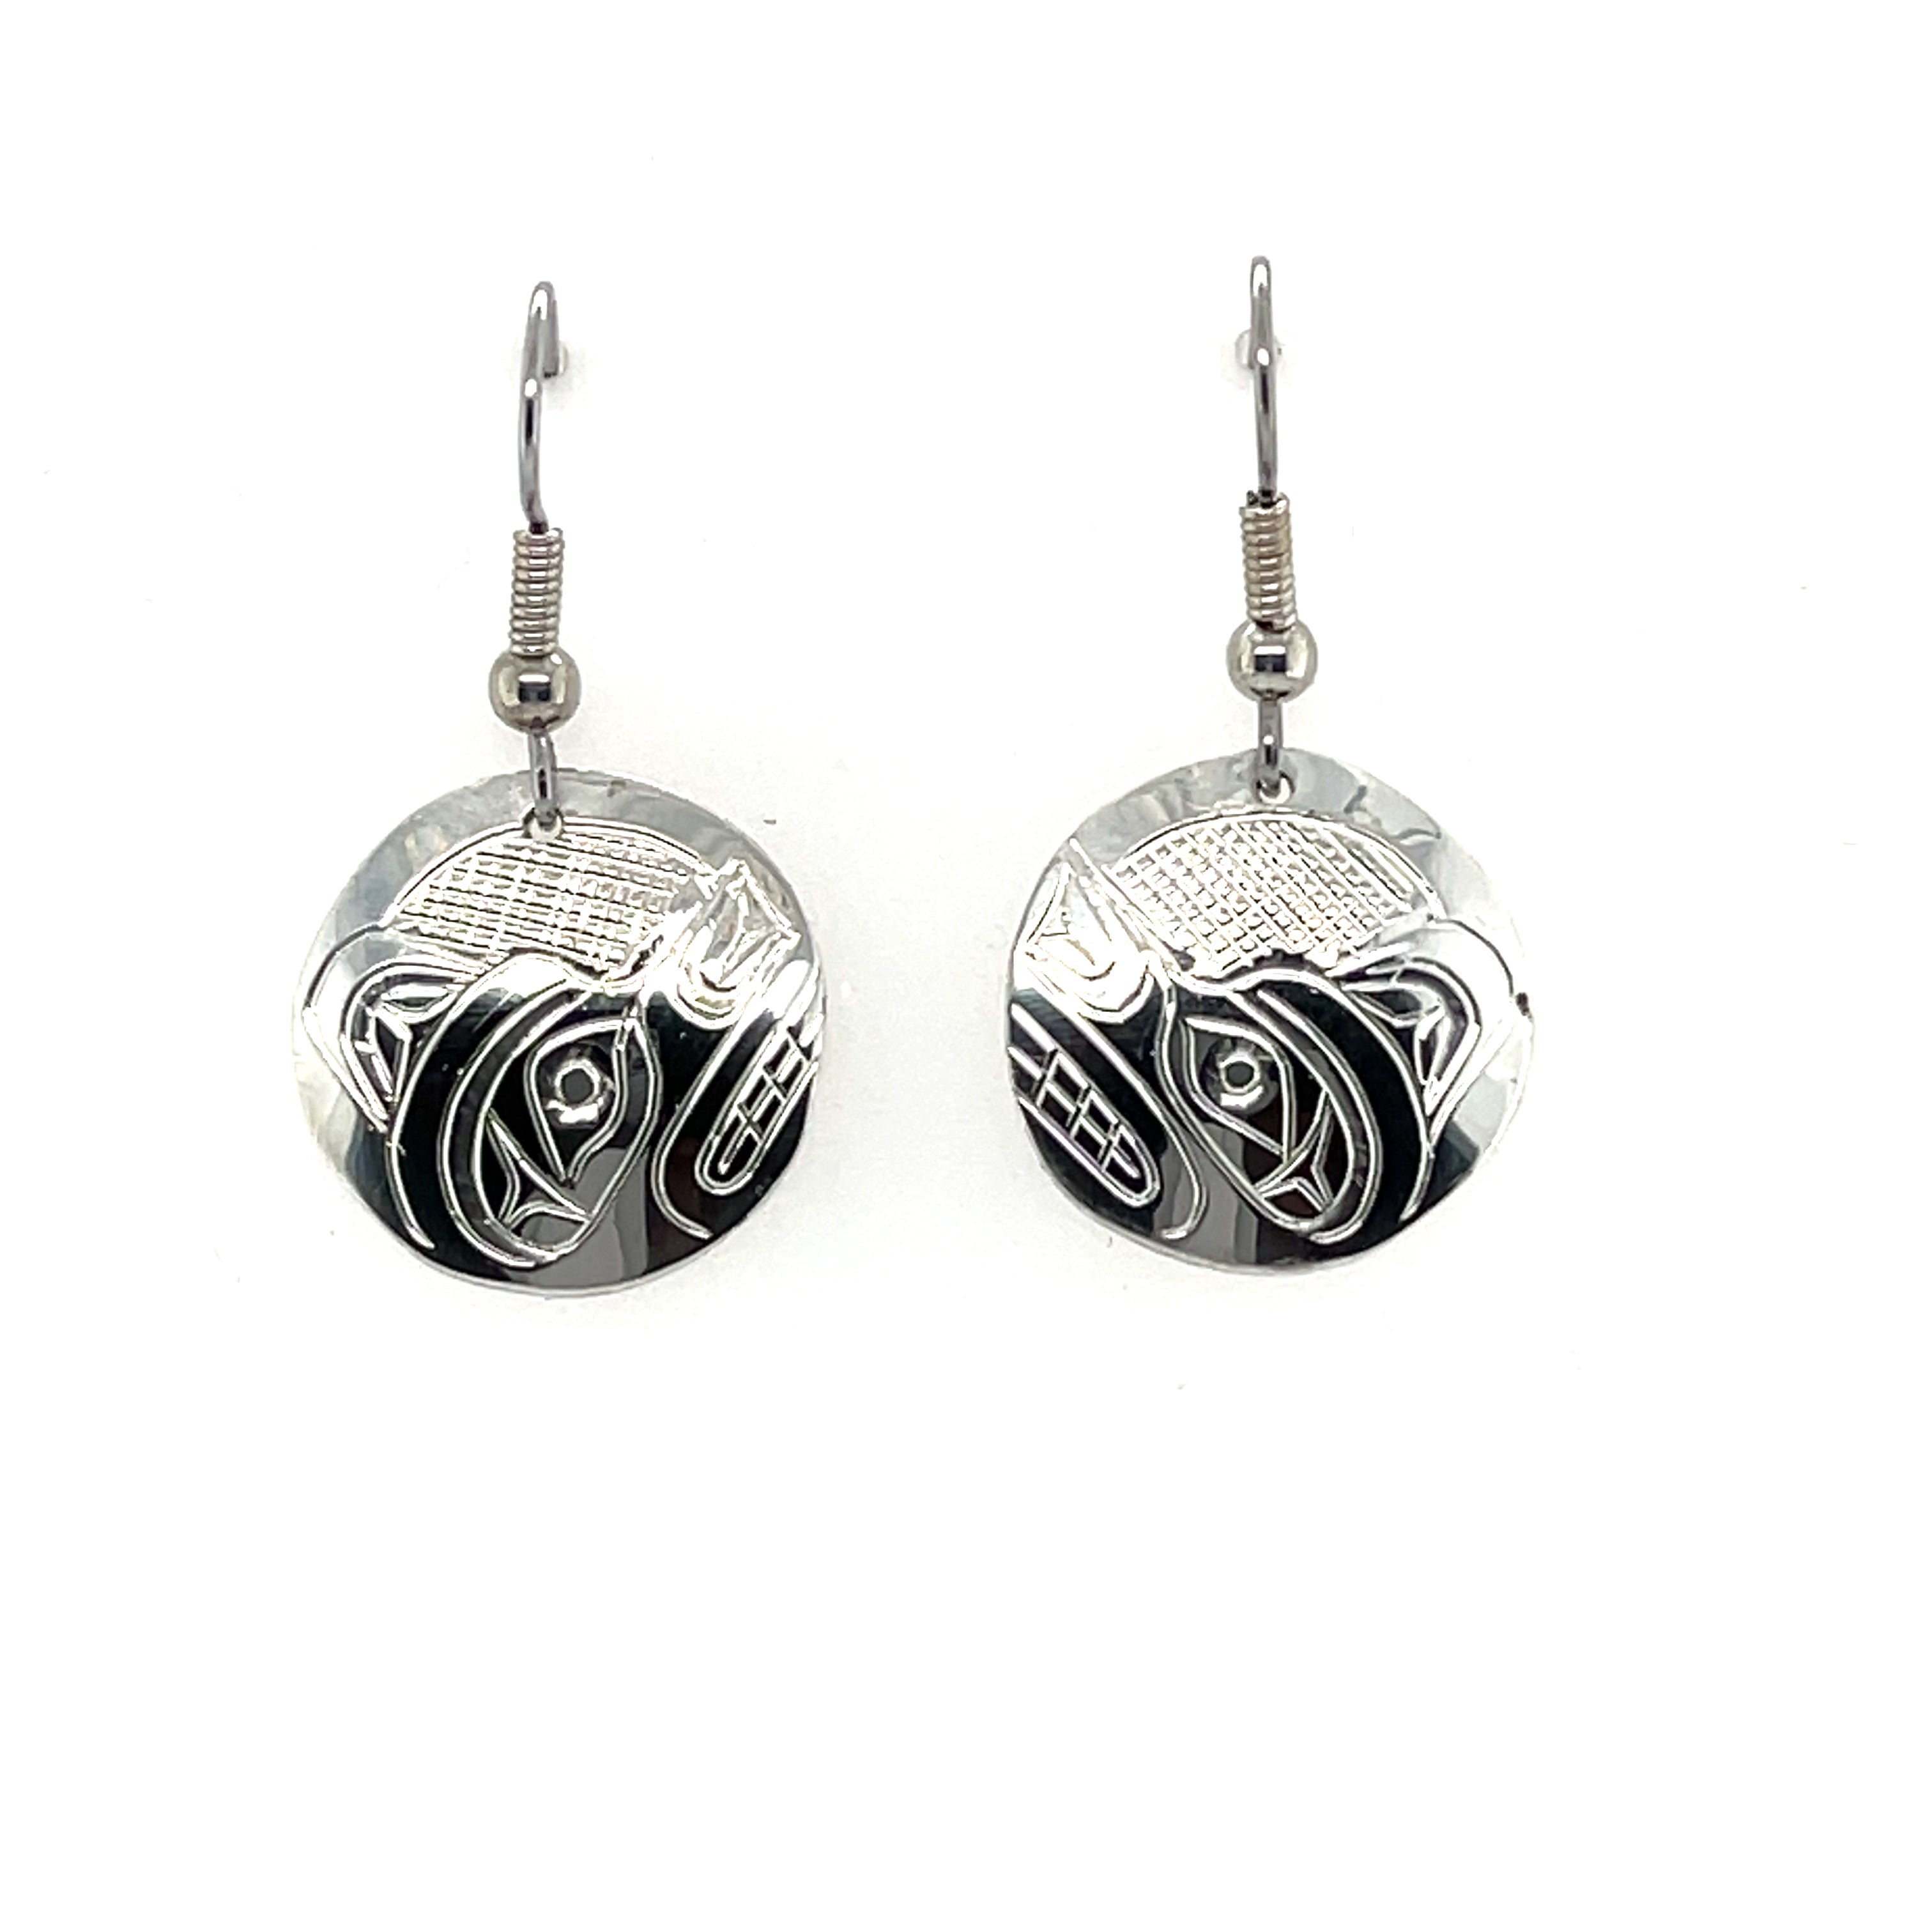 Earrings - Sterling Silver - Round - Wolf